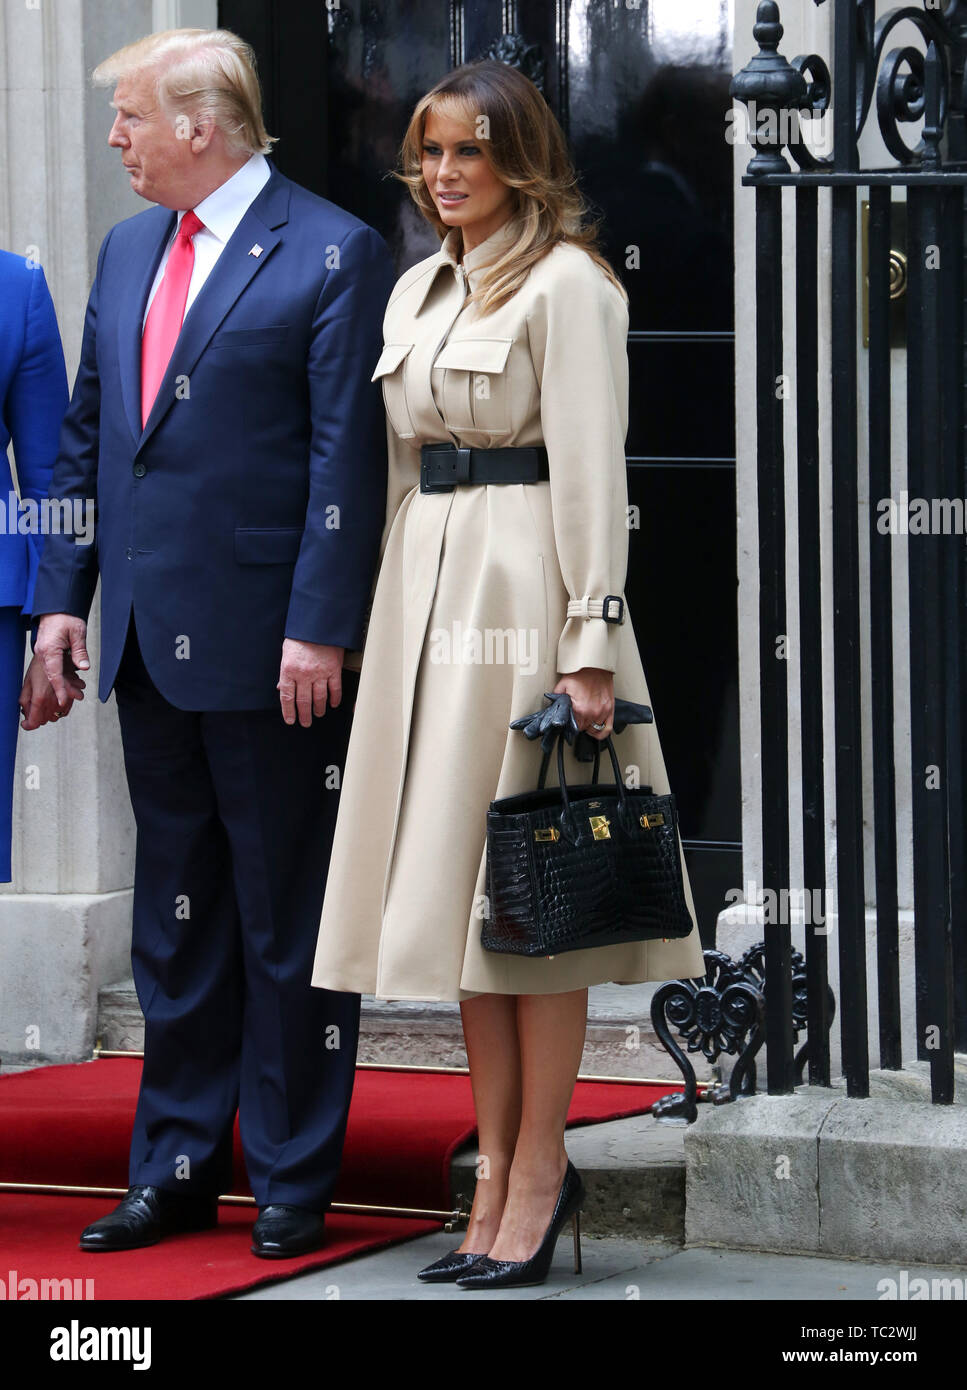 London, UK. 04th June, 2019. US President Donald Trump and his wife Melania Trump meet with UK Prime Minister Theresa May and her husband PhillipMay (not pictured) as they visit number 10 Downing Street as part of Donald Trump official state visit to the UK. Credit: SOPA Images Limited/Alamy Live News Stock Photo